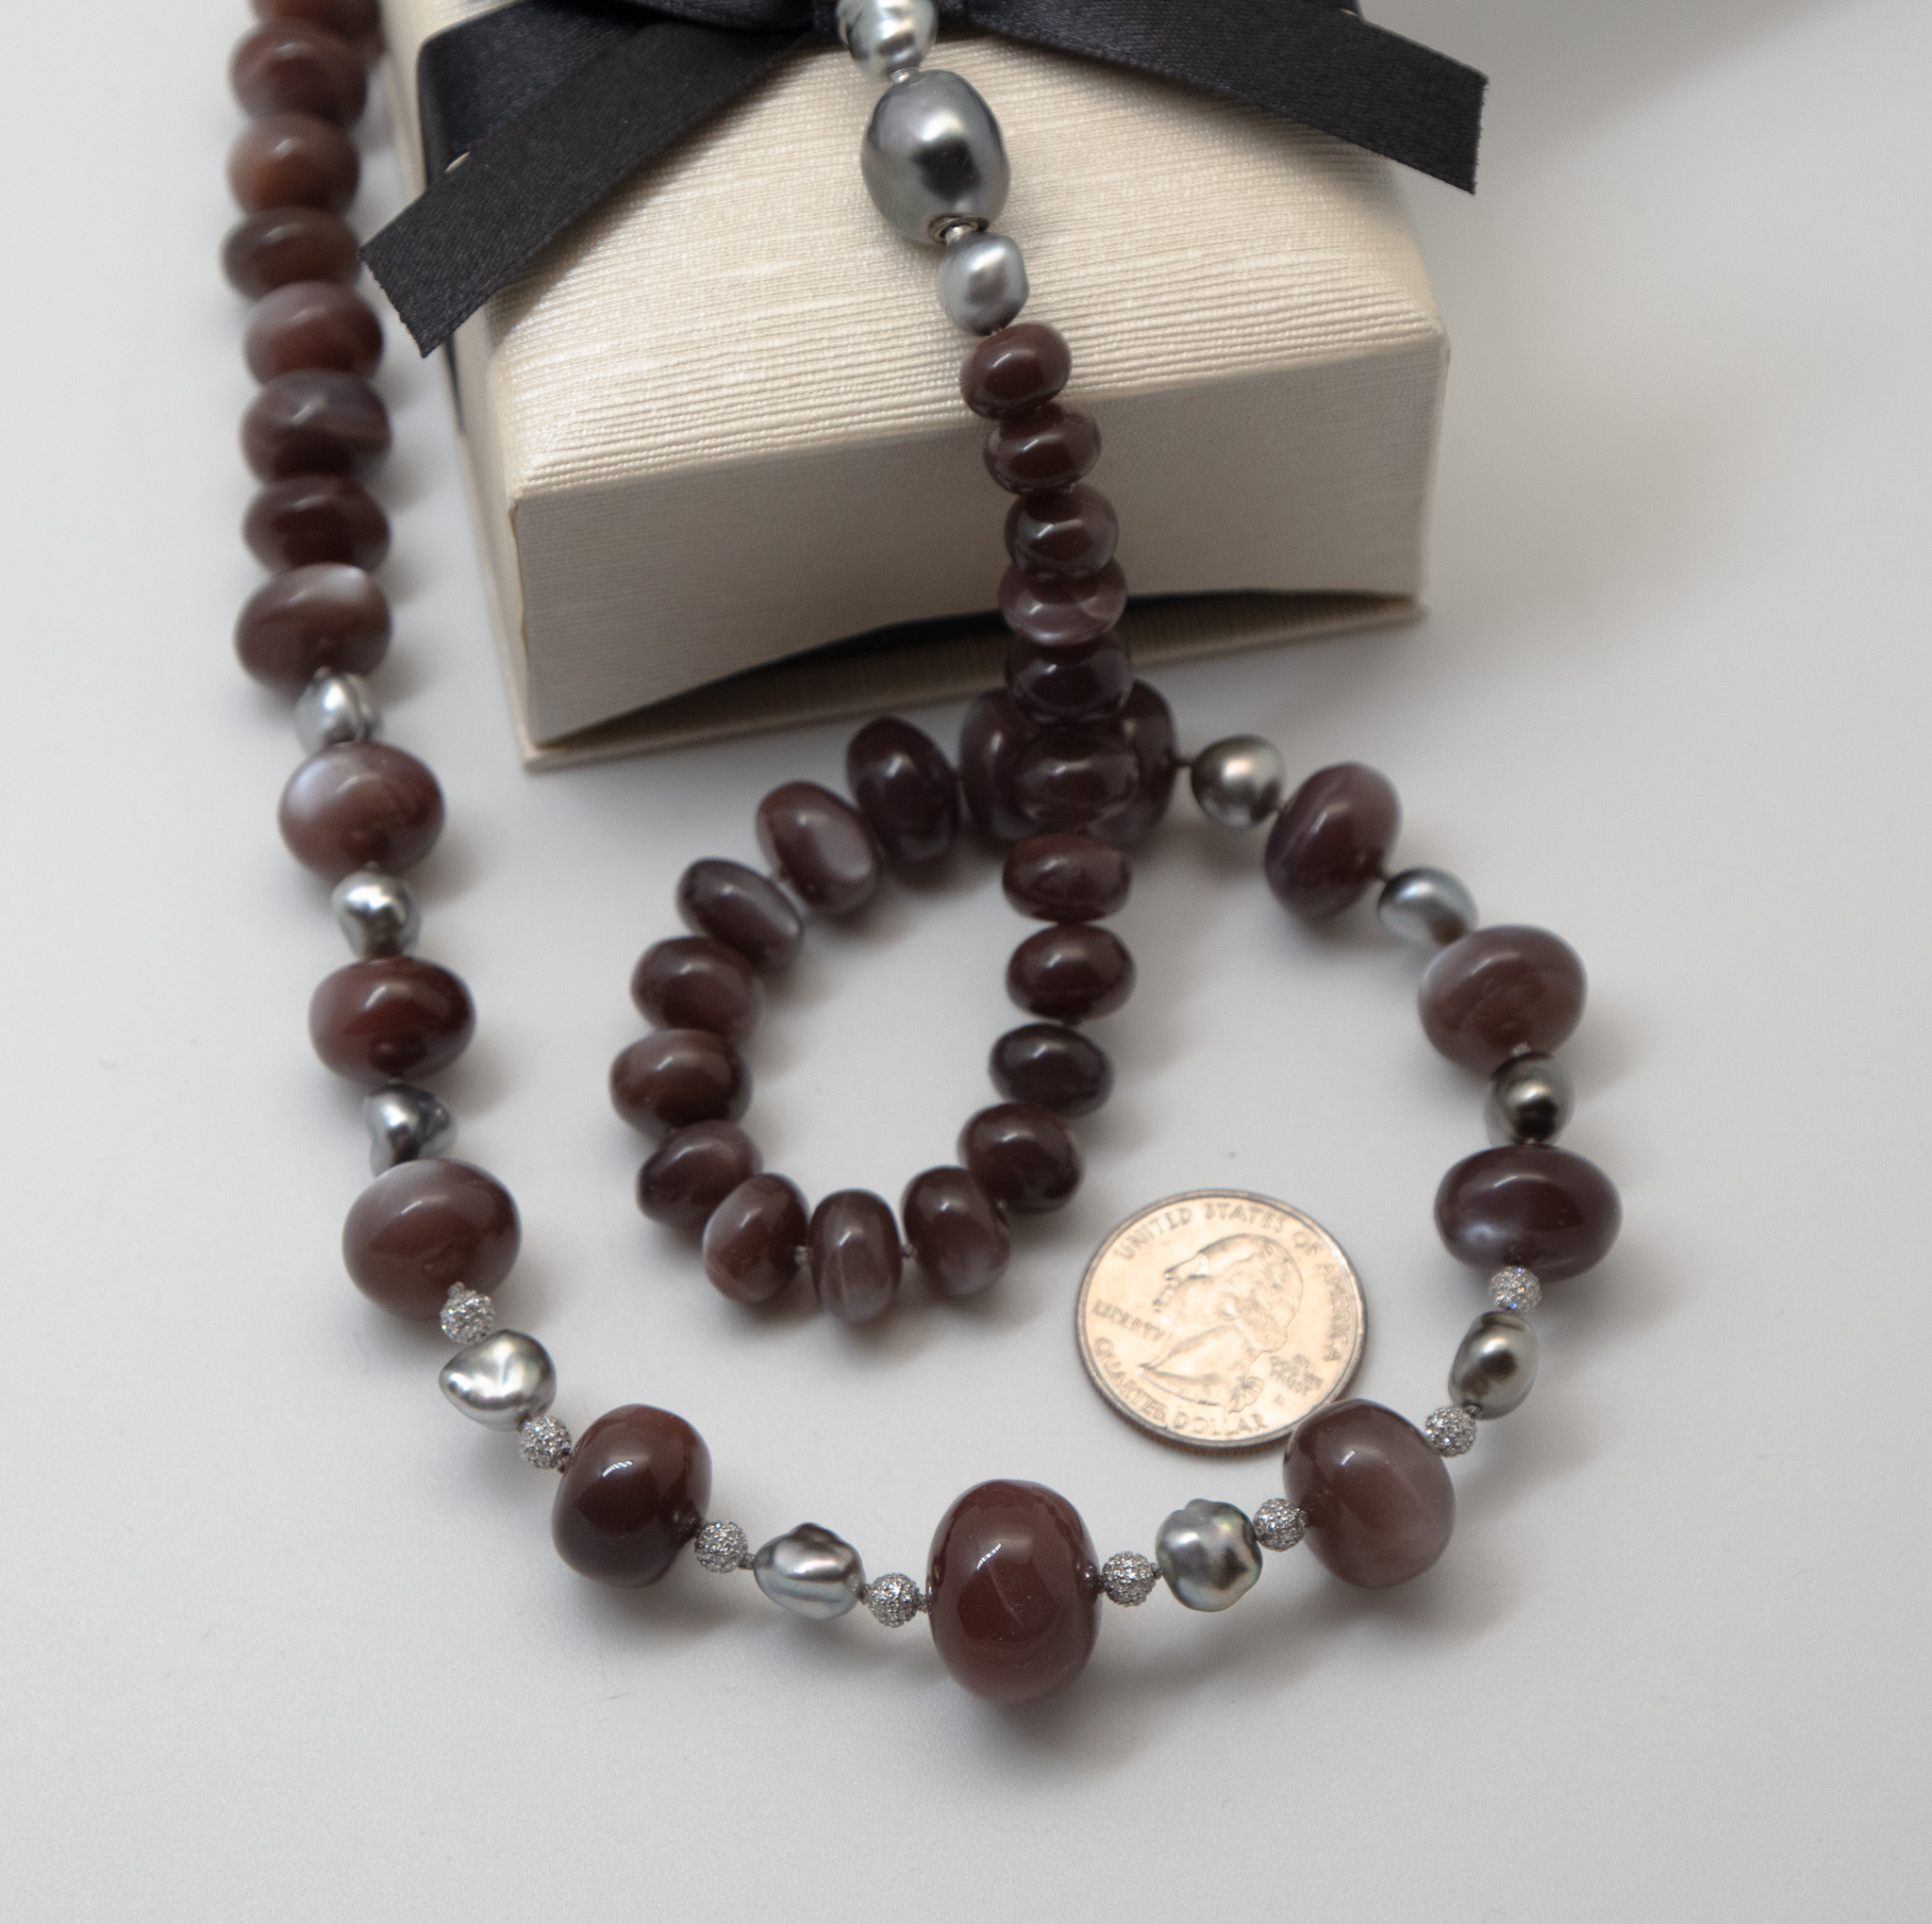 chocolate moonstone necklace showing US quarter can for scale